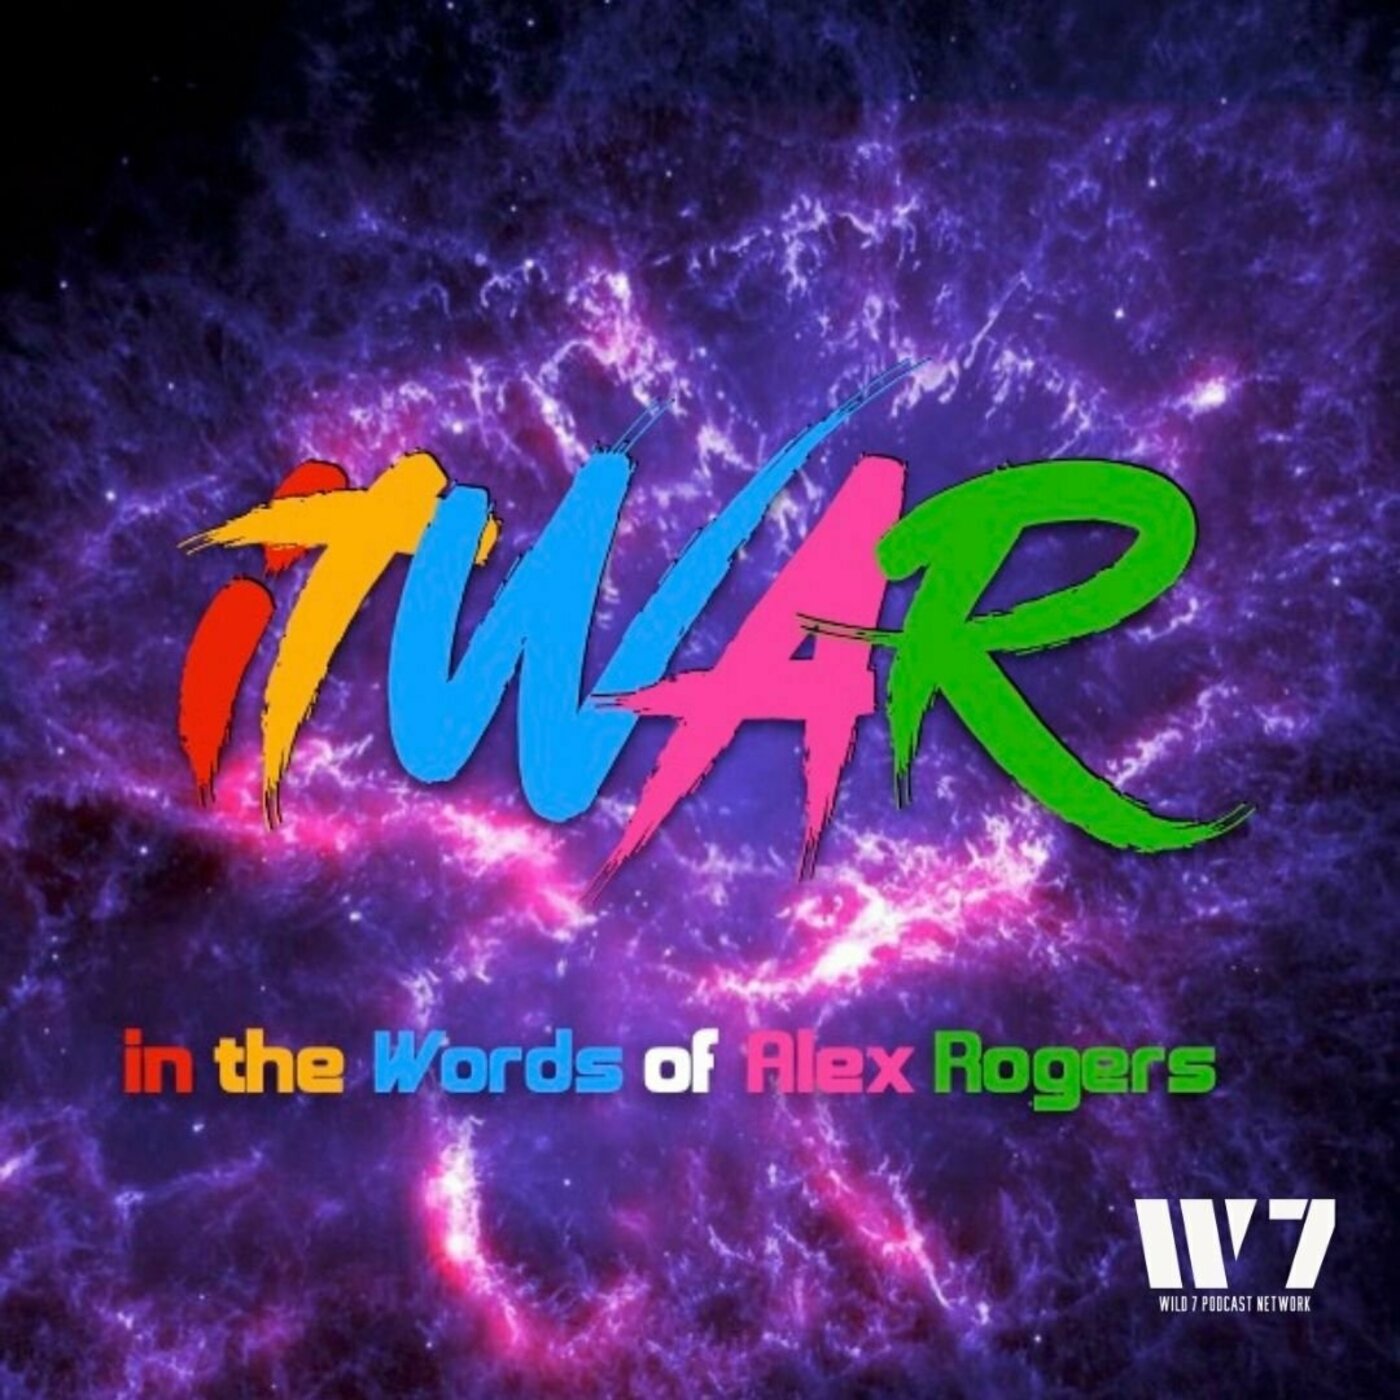 ITWAR - Episode 46: IT'S A GOOD LIFE IF I'M PAYING ATTENTION - In the Words of Alex Rogers